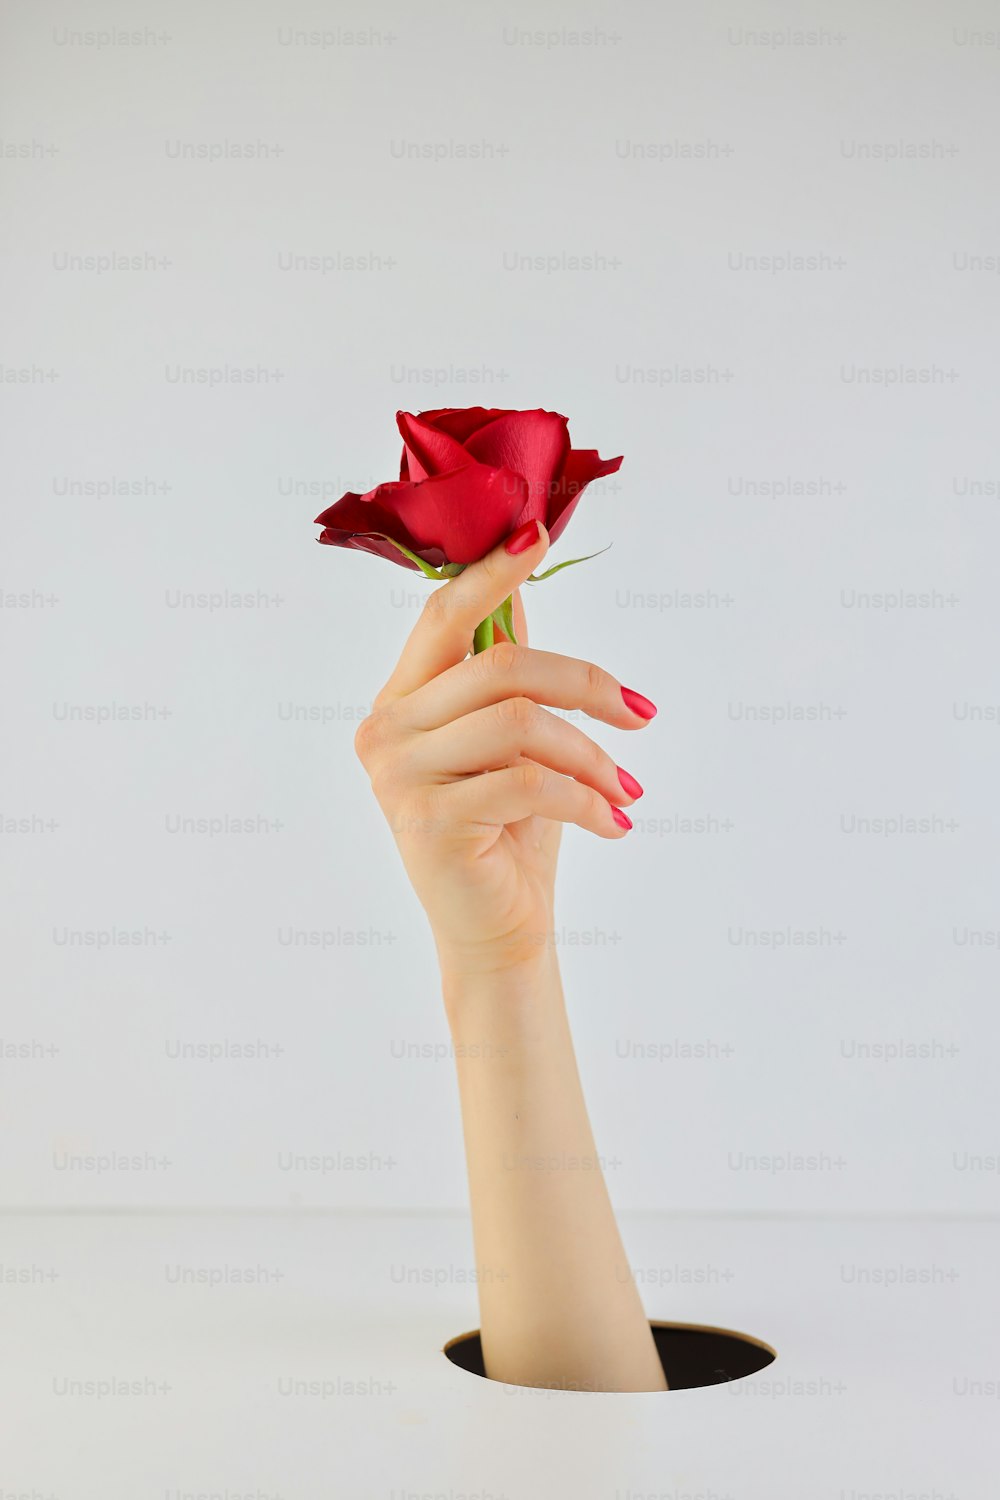 a woman's hand holding a single red rose